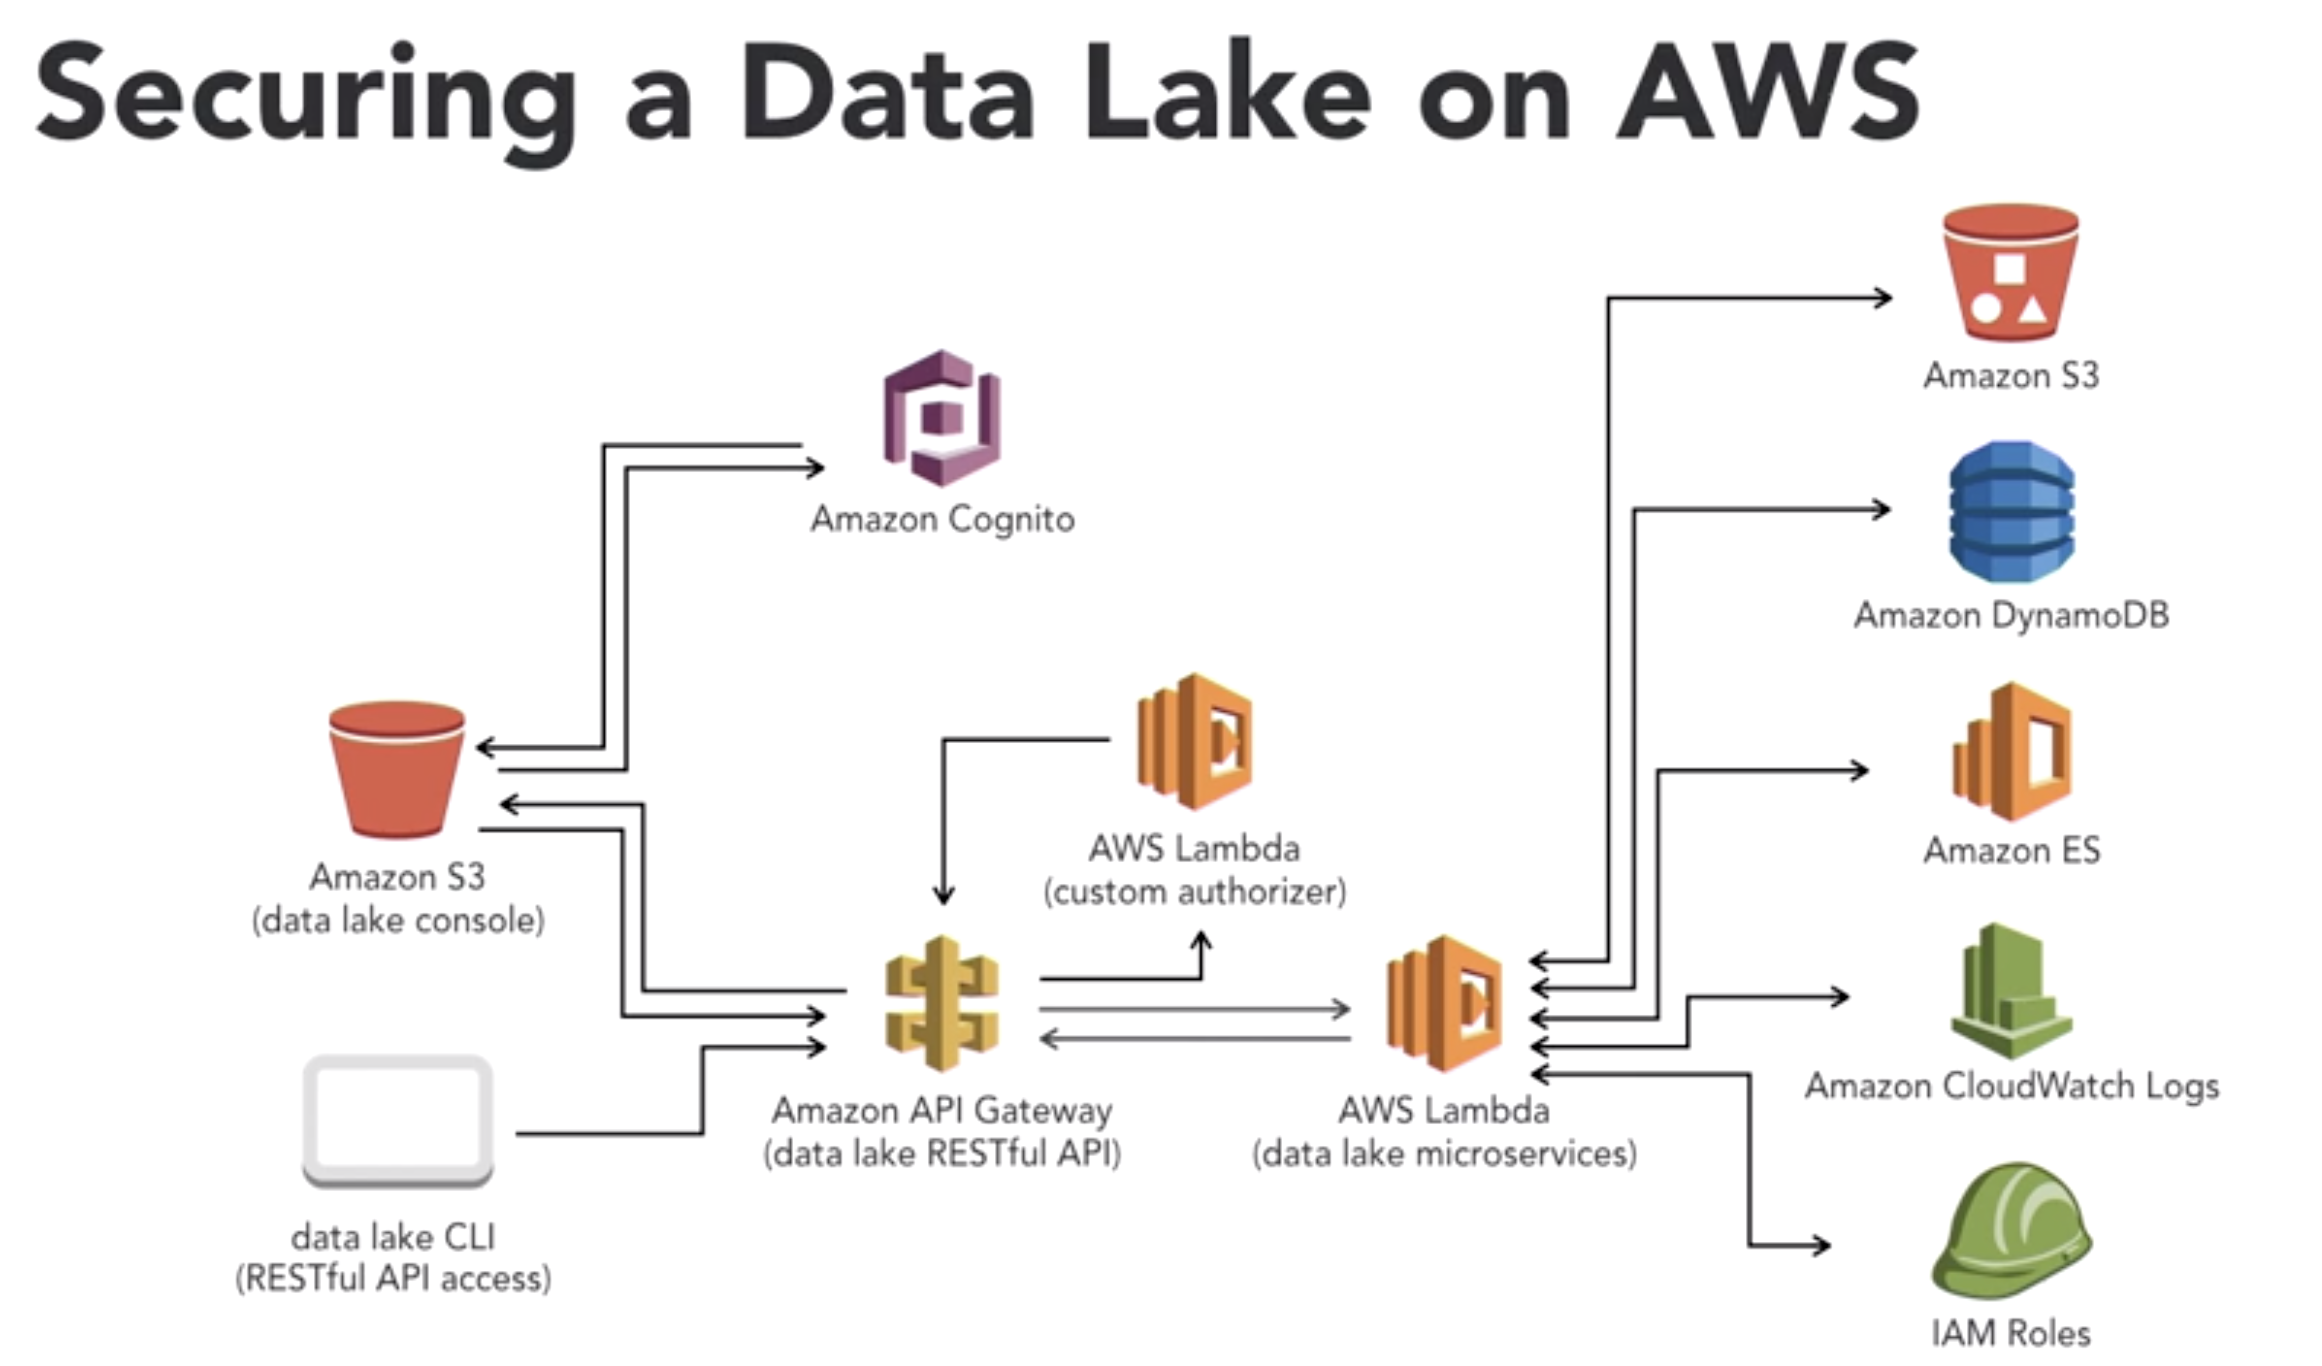 aws solution architect associate salary in us